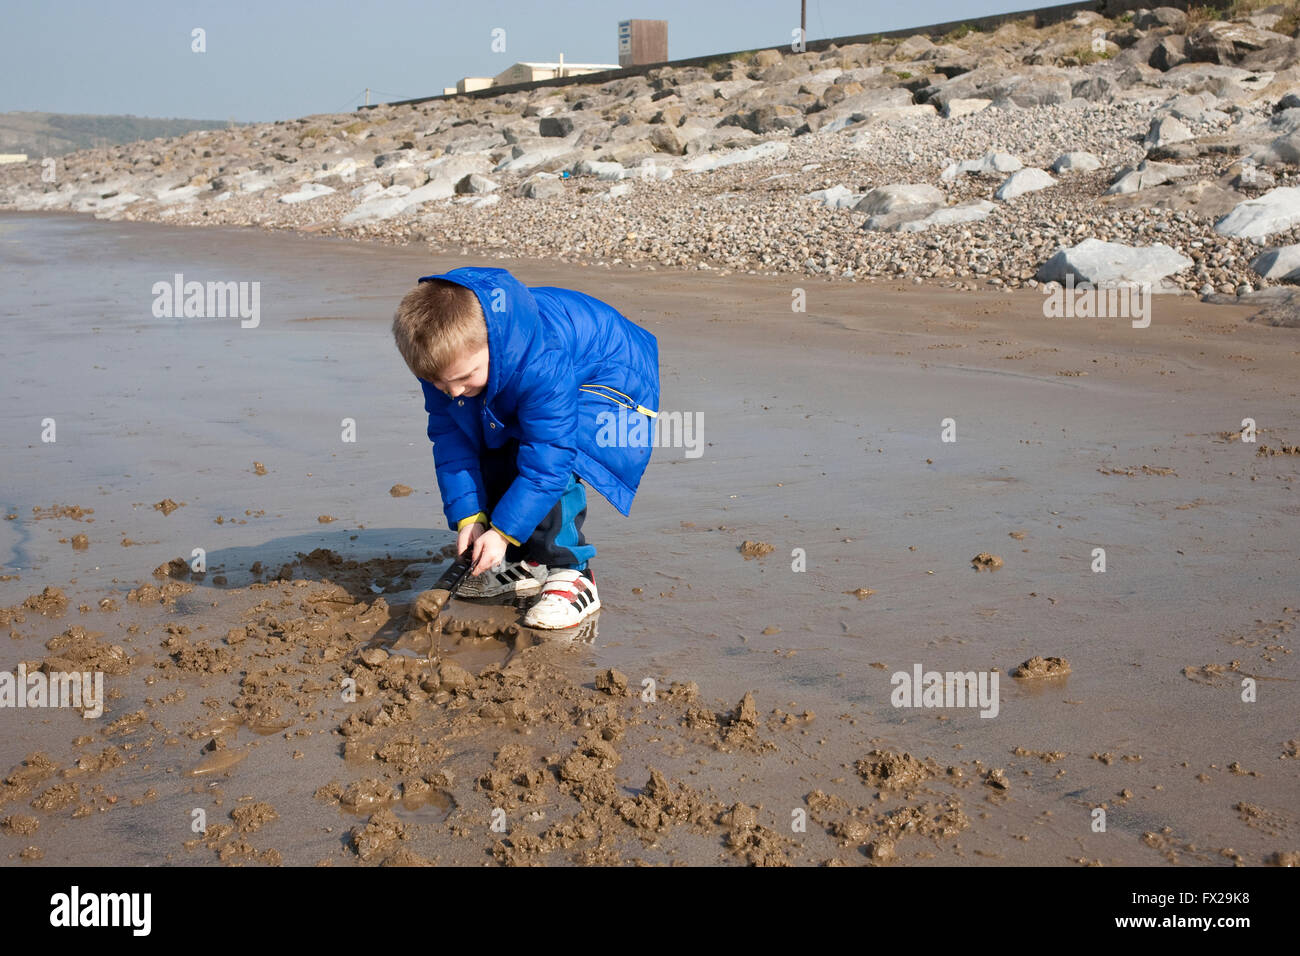 young boy playing in the packed sand on the beach using an ad hoc spade Stock Photo